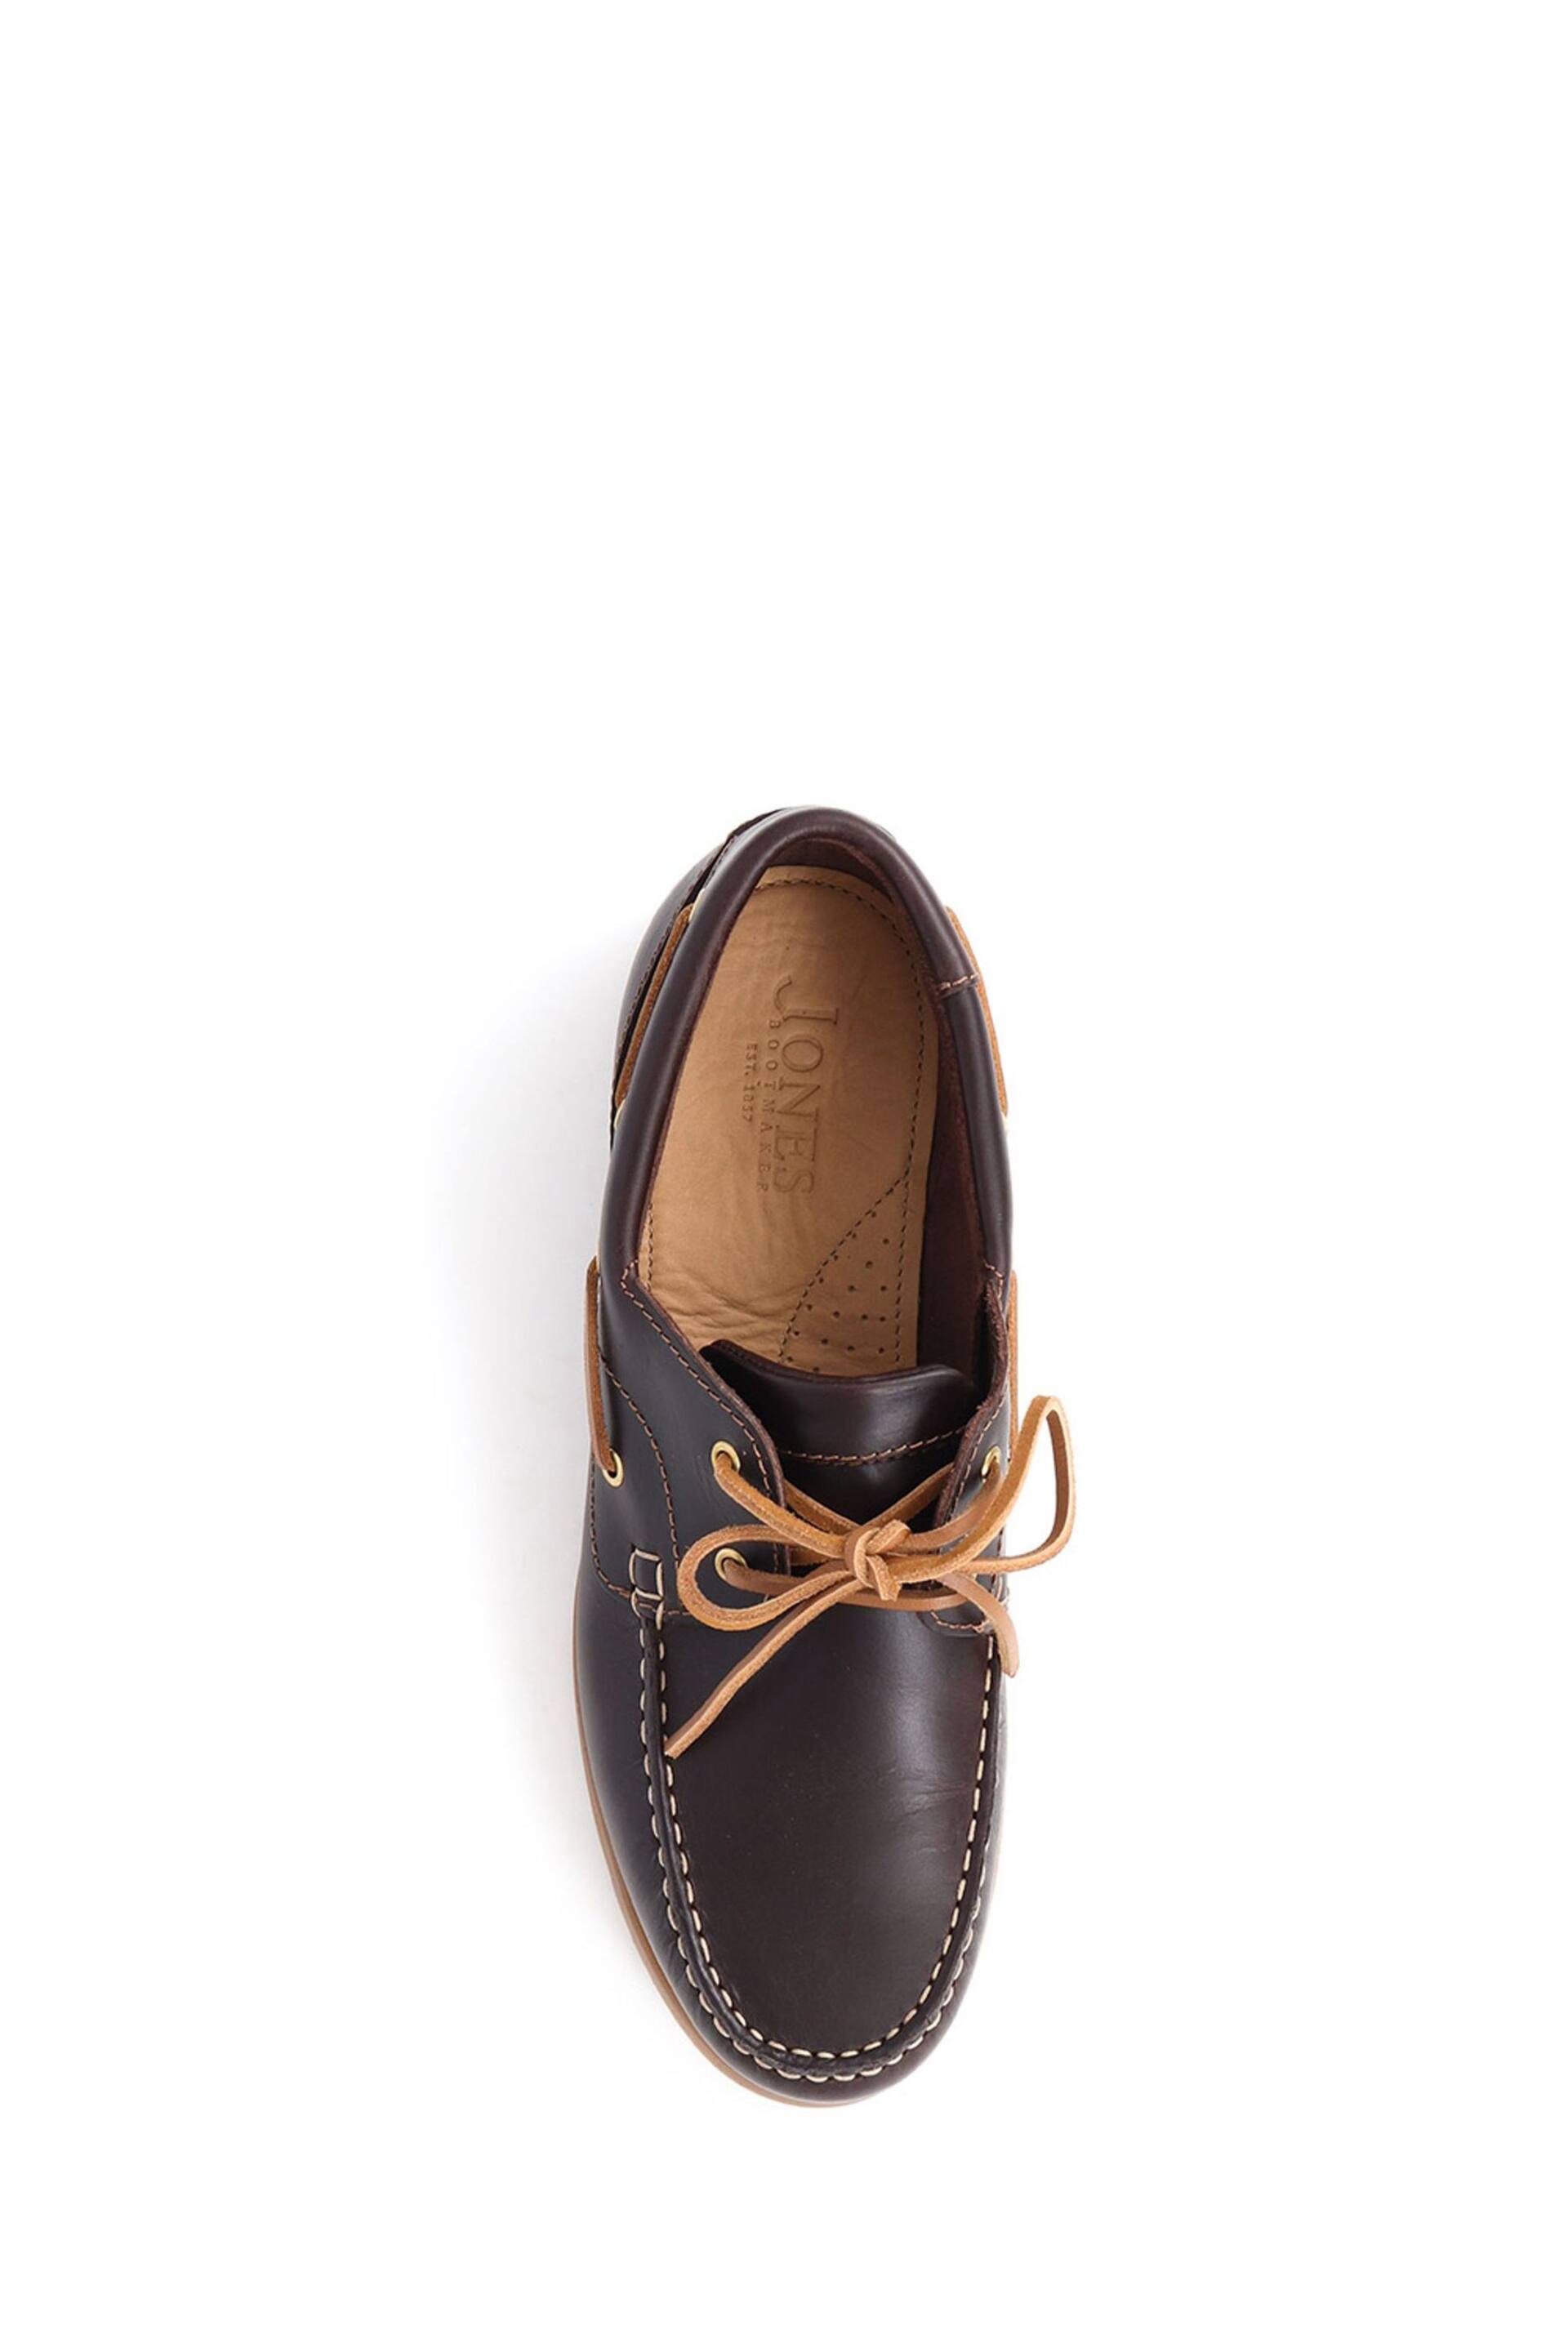 Jones Bootmaker Parsons Leather Boat Brown Shoes - Image 4 of 6